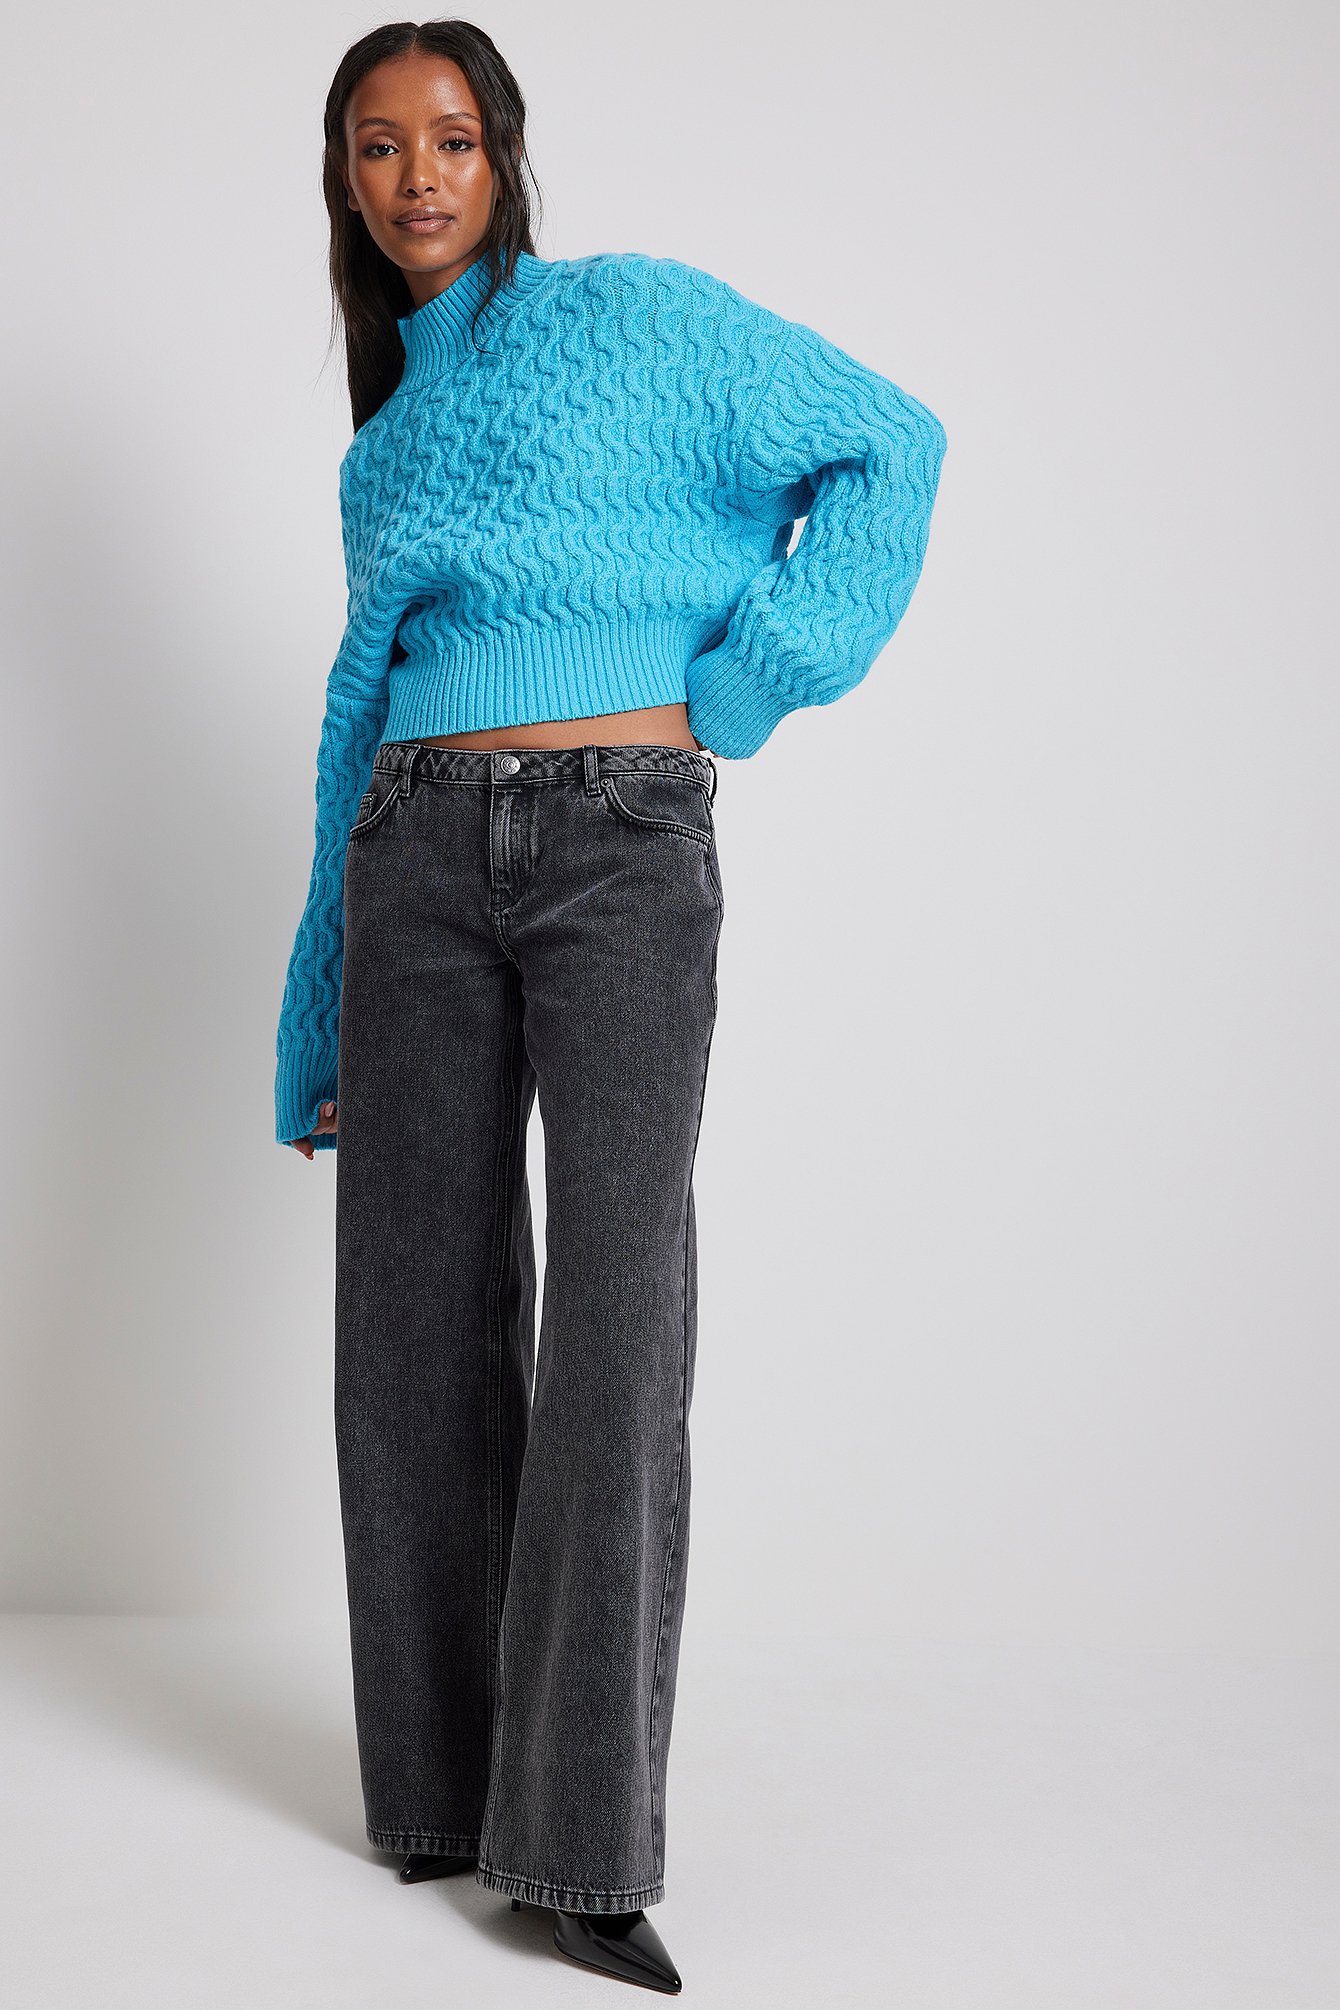 Blue Cable Knitted Cropped Sweater